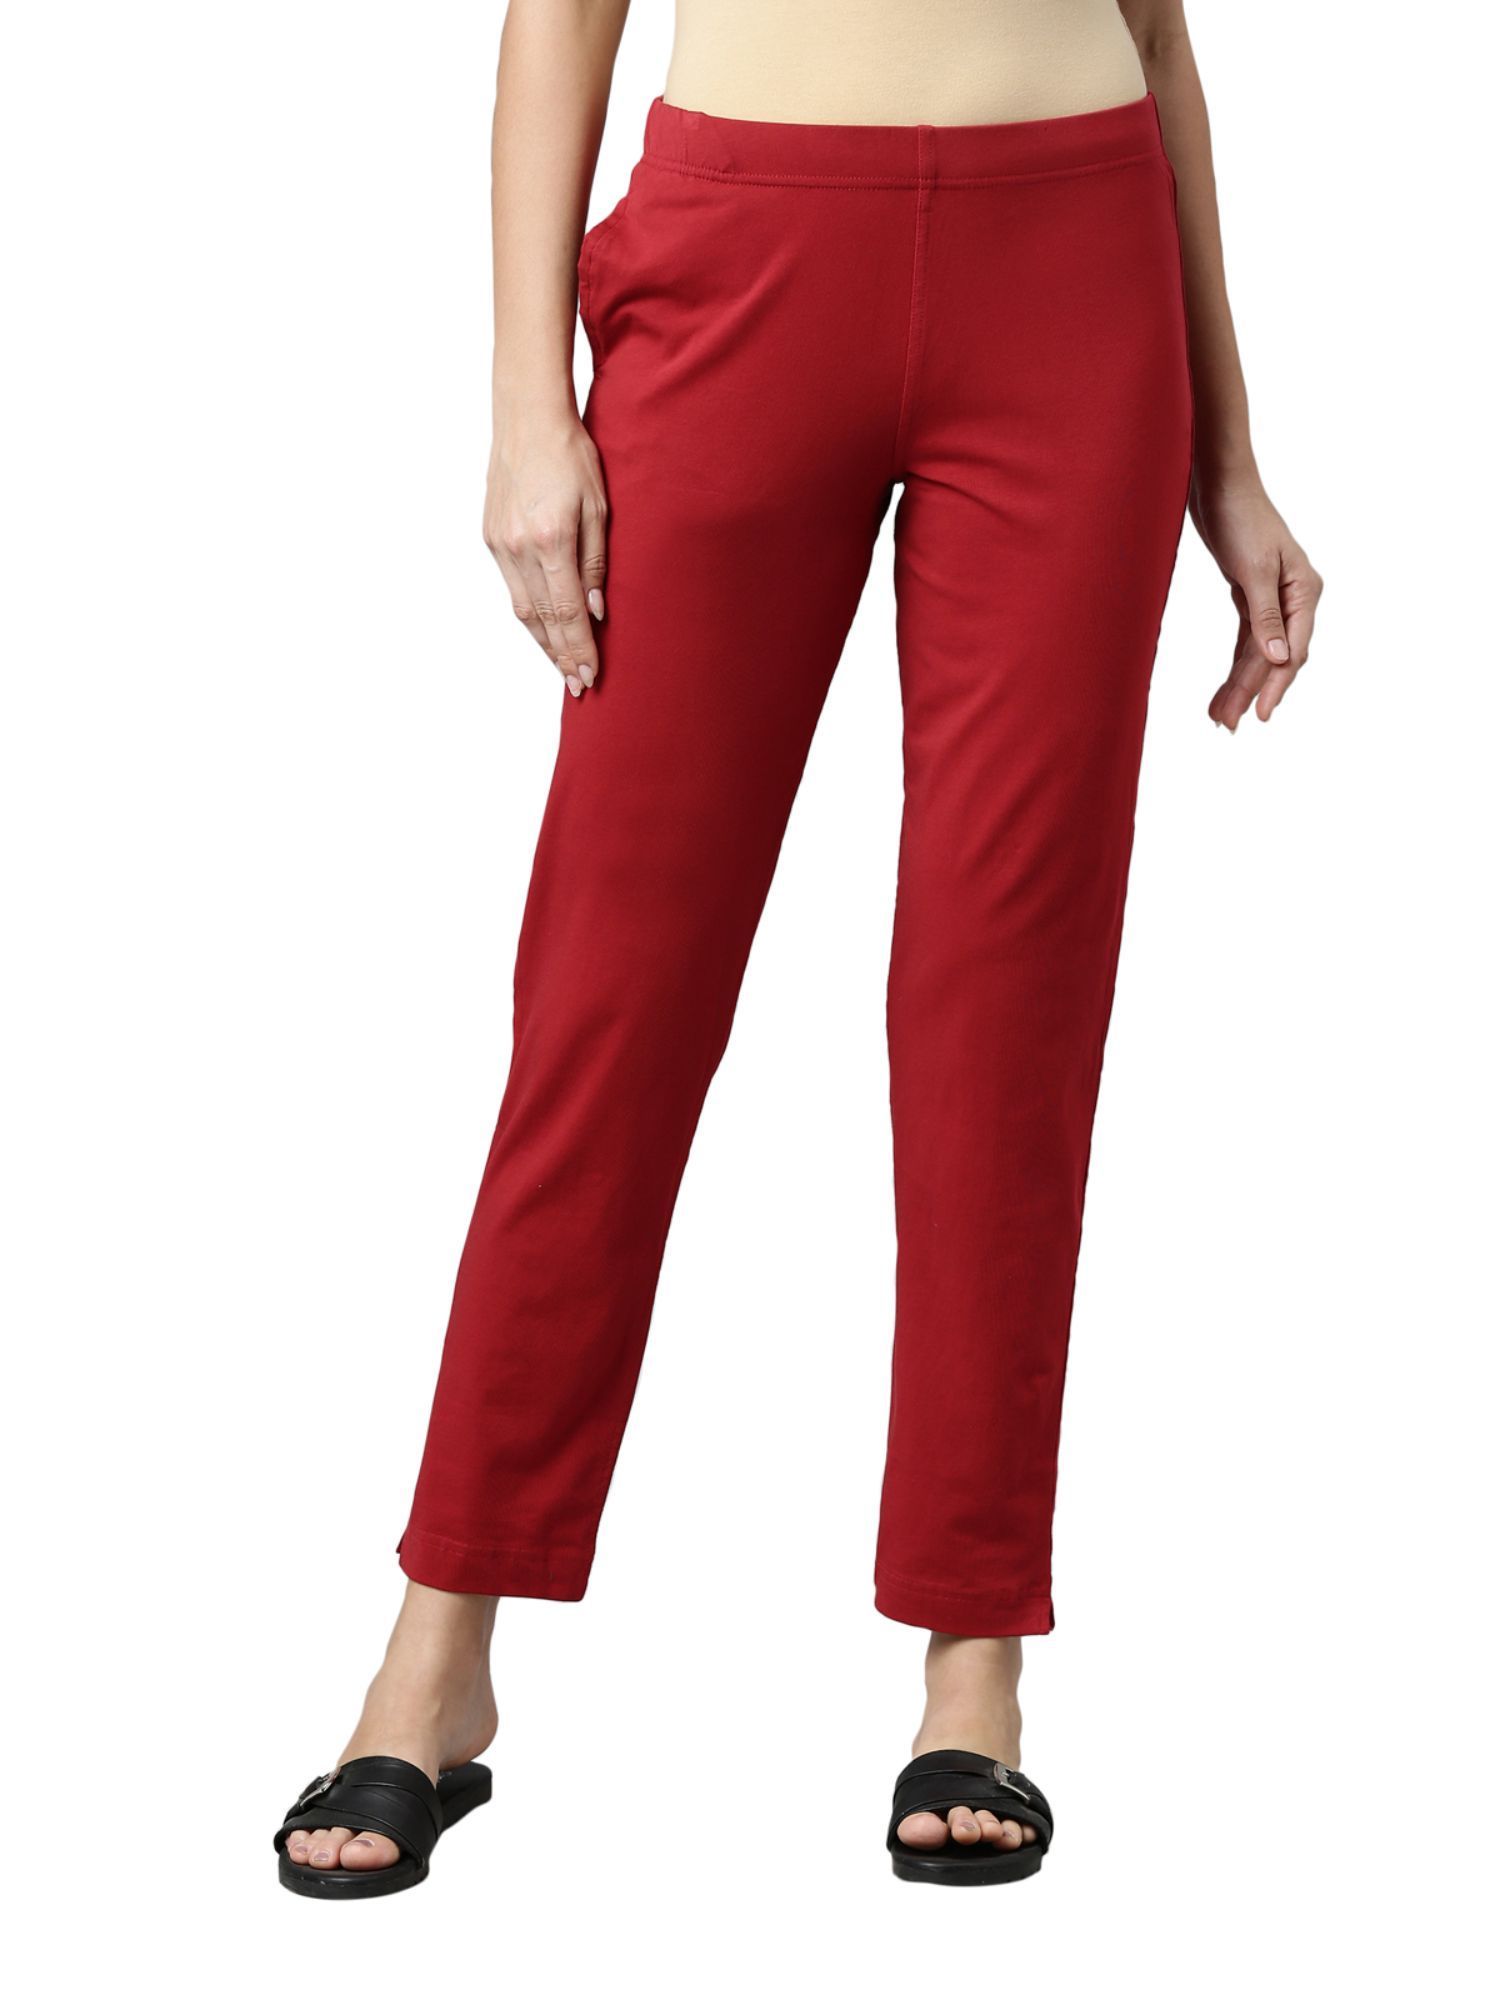 Buy GO COLORS Women Solid Coral Mid Rise Cotton Pants - S at Amazon.in